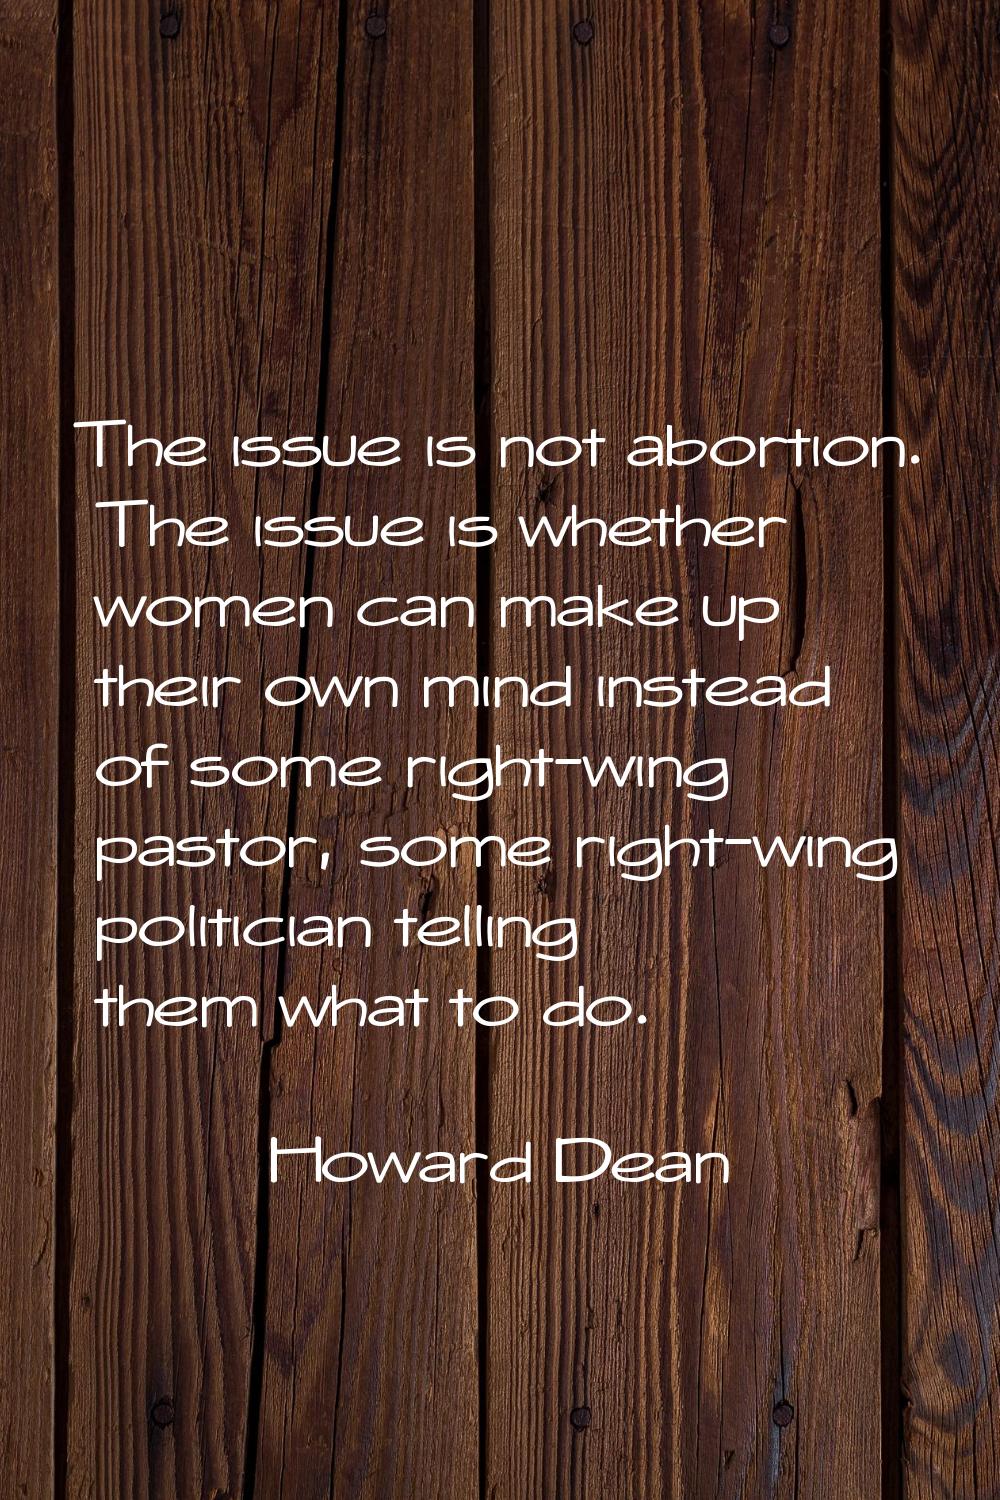 The issue is not abortion. The issue is whether women can make up their own mind instead of some ri